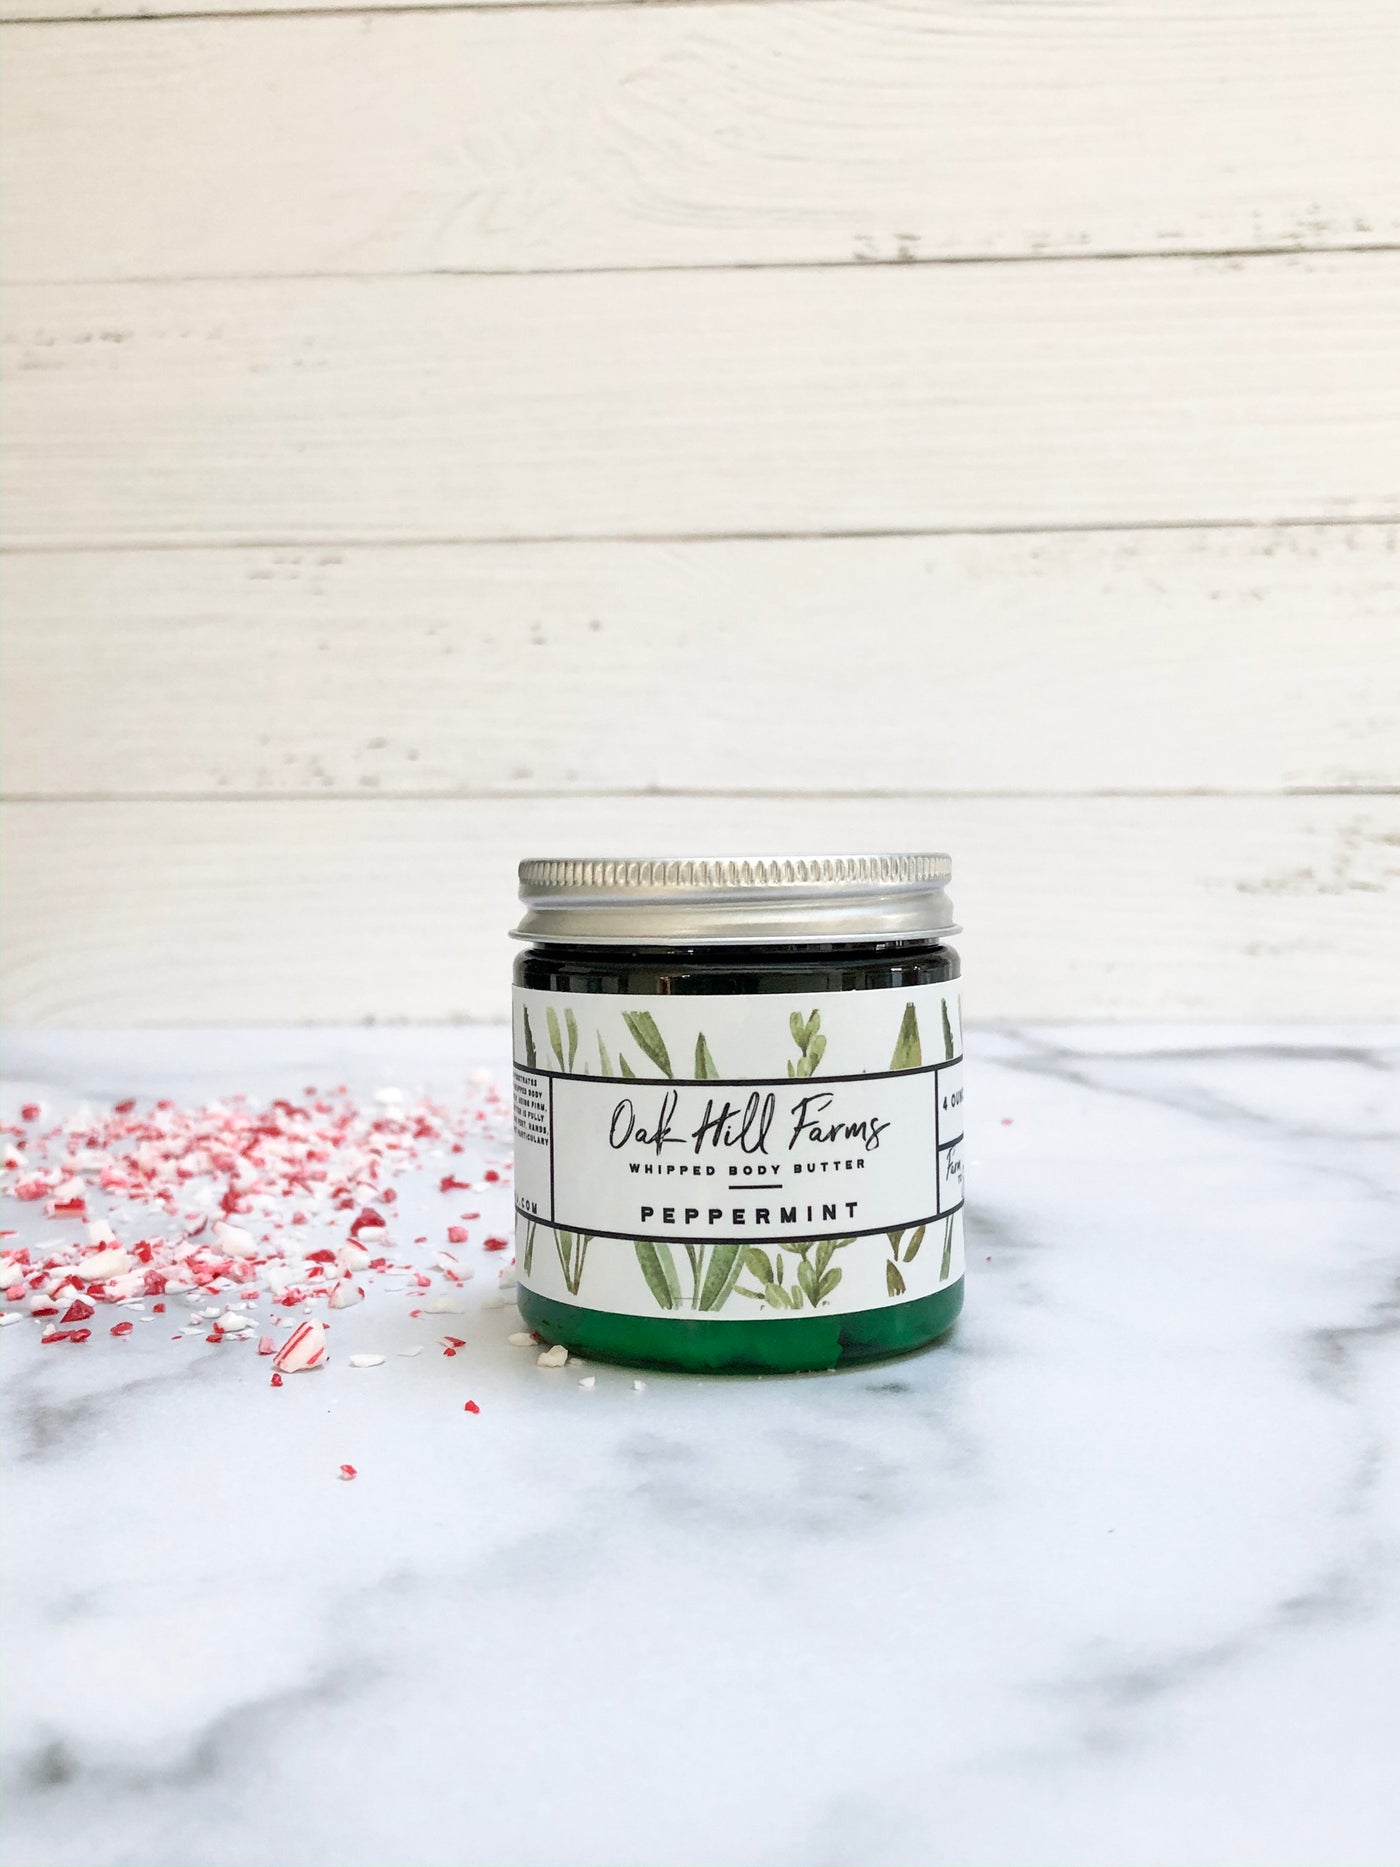 Peppermint Whipped Body Butter